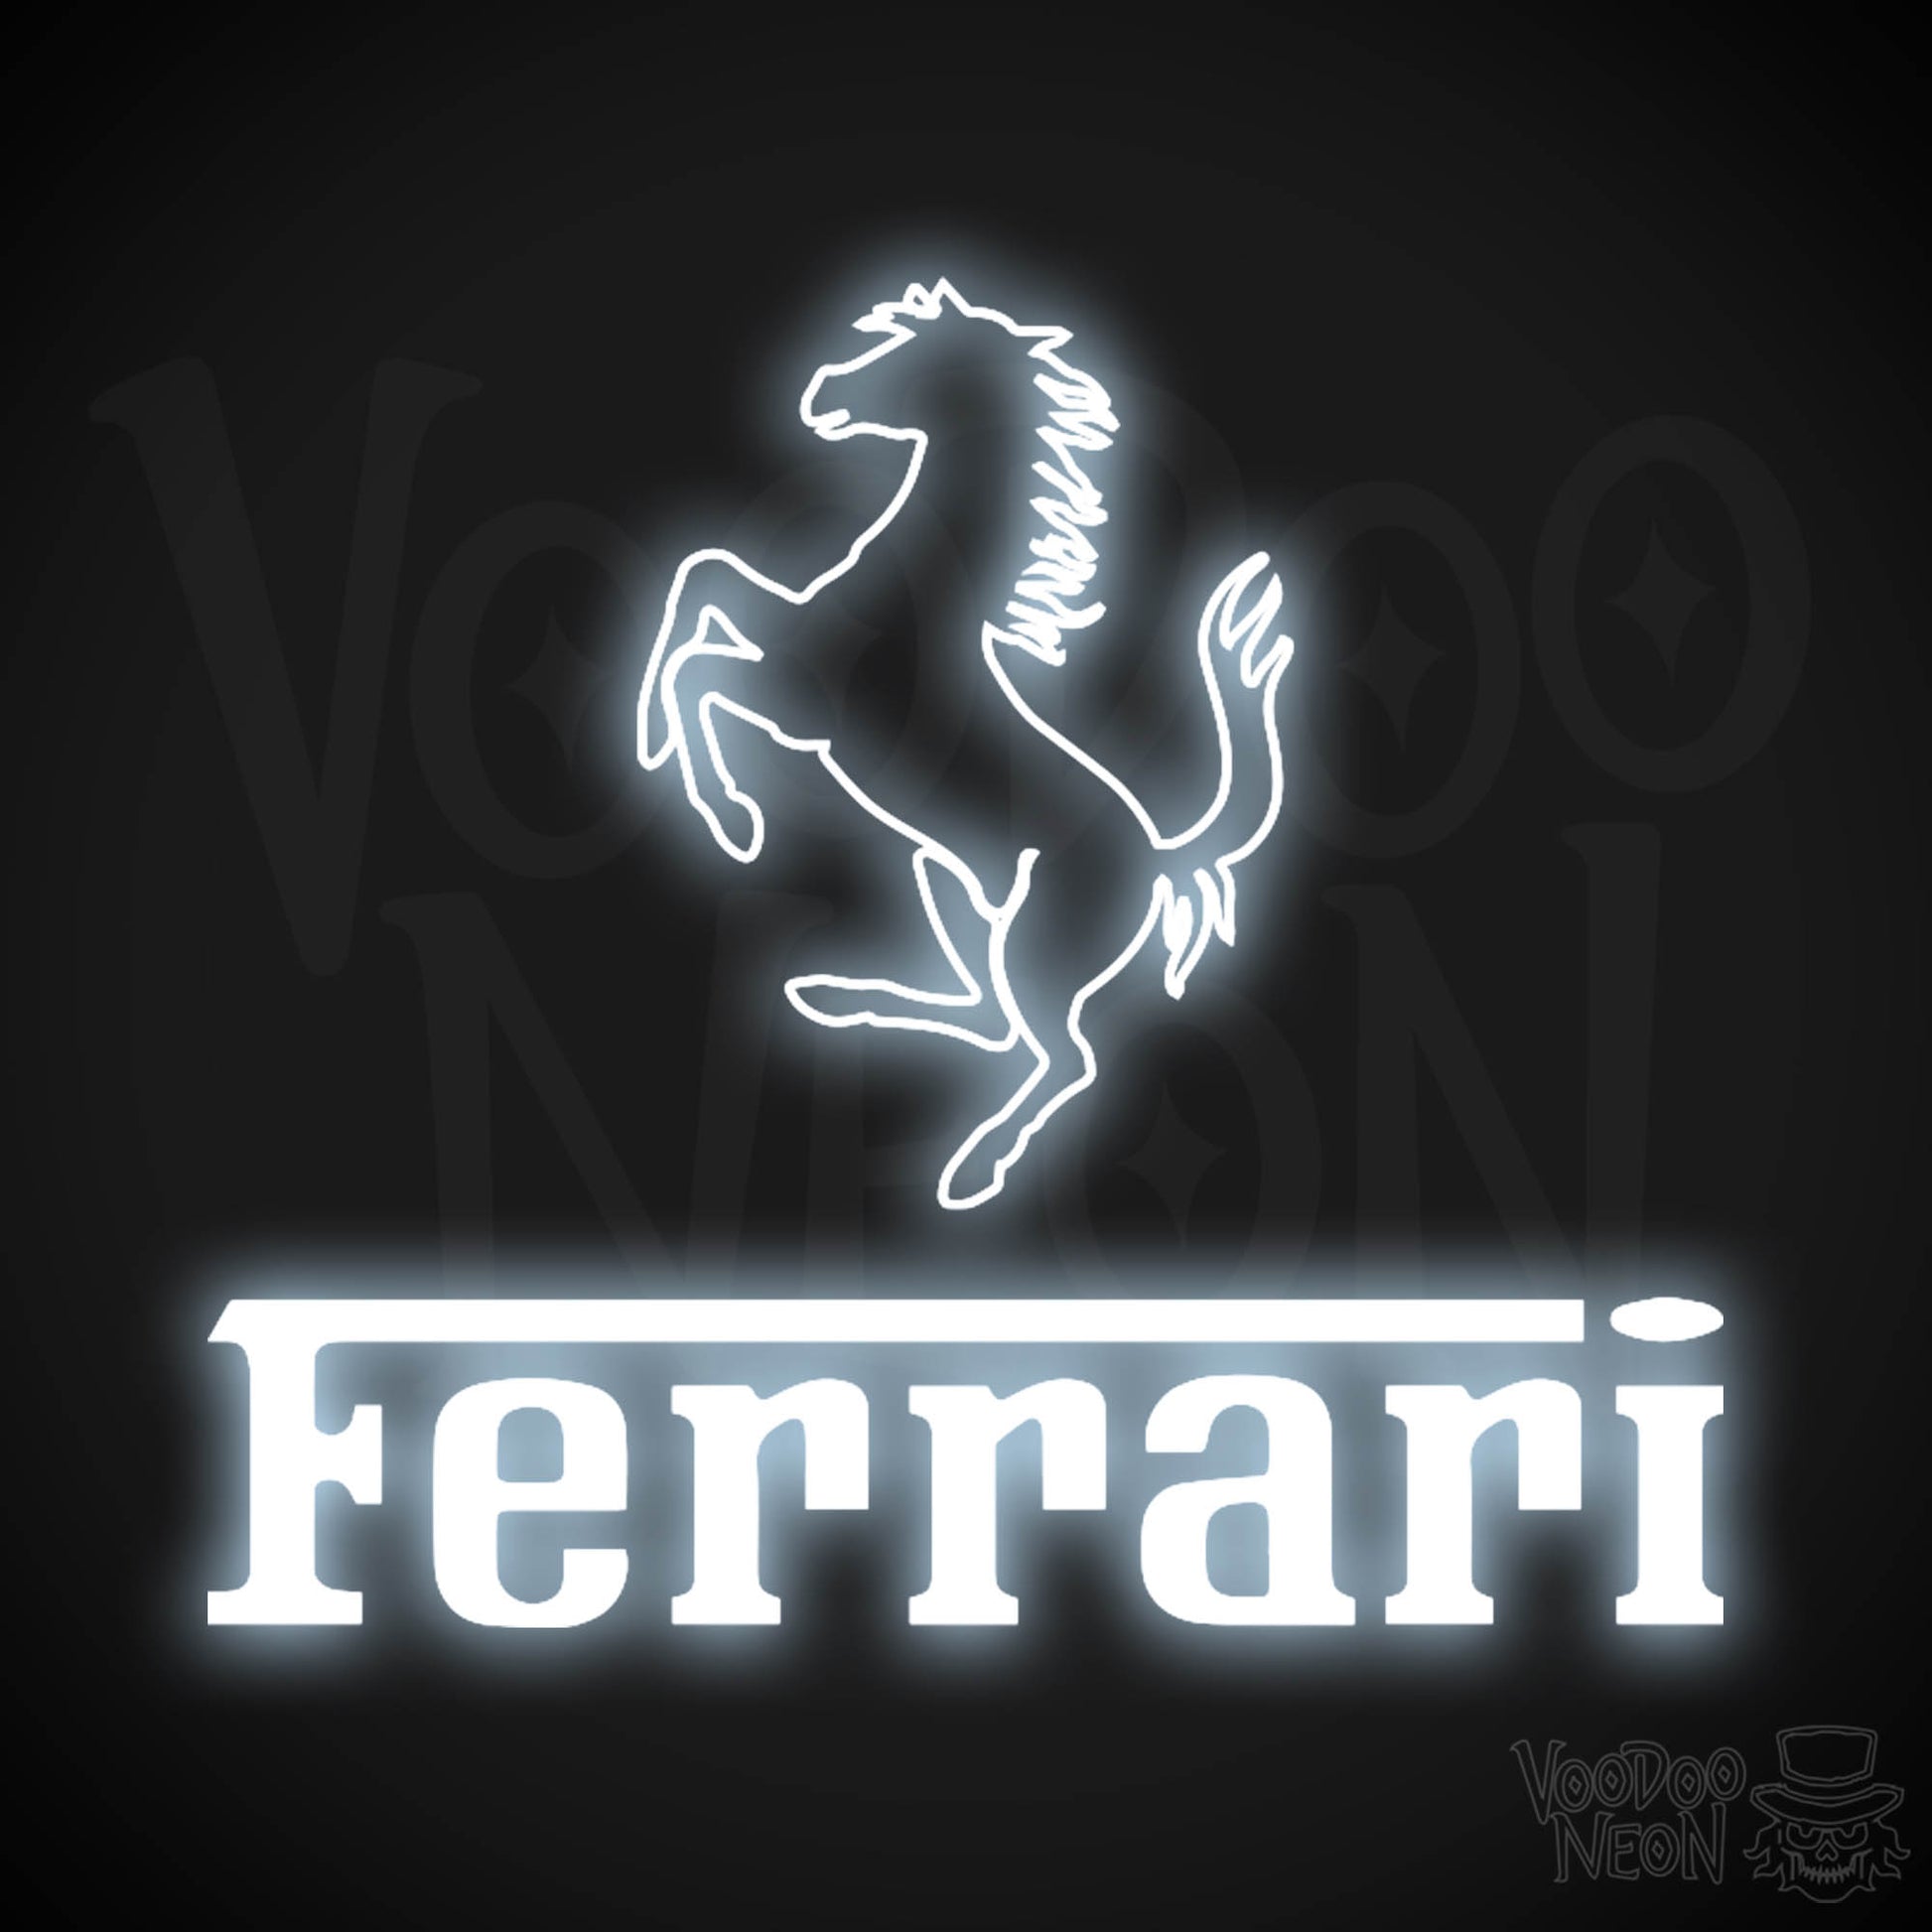 Ferrari Neon Sign - Neon Ferrari Sign - Ferrari Logo Wall Art - Color Cool White